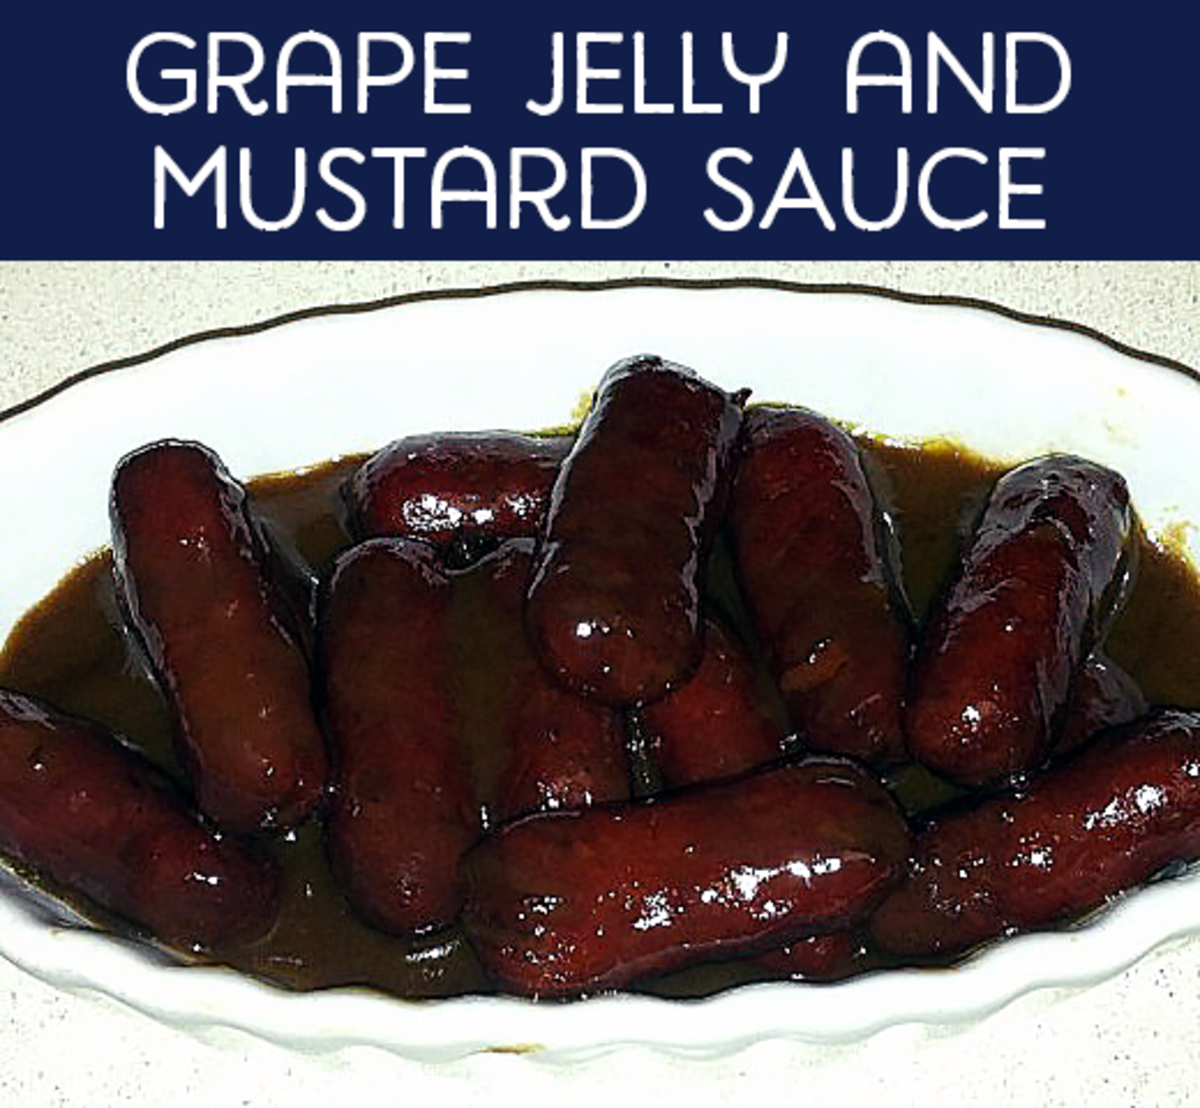 Lit'l Smokies in grape jelly and mustard sauce